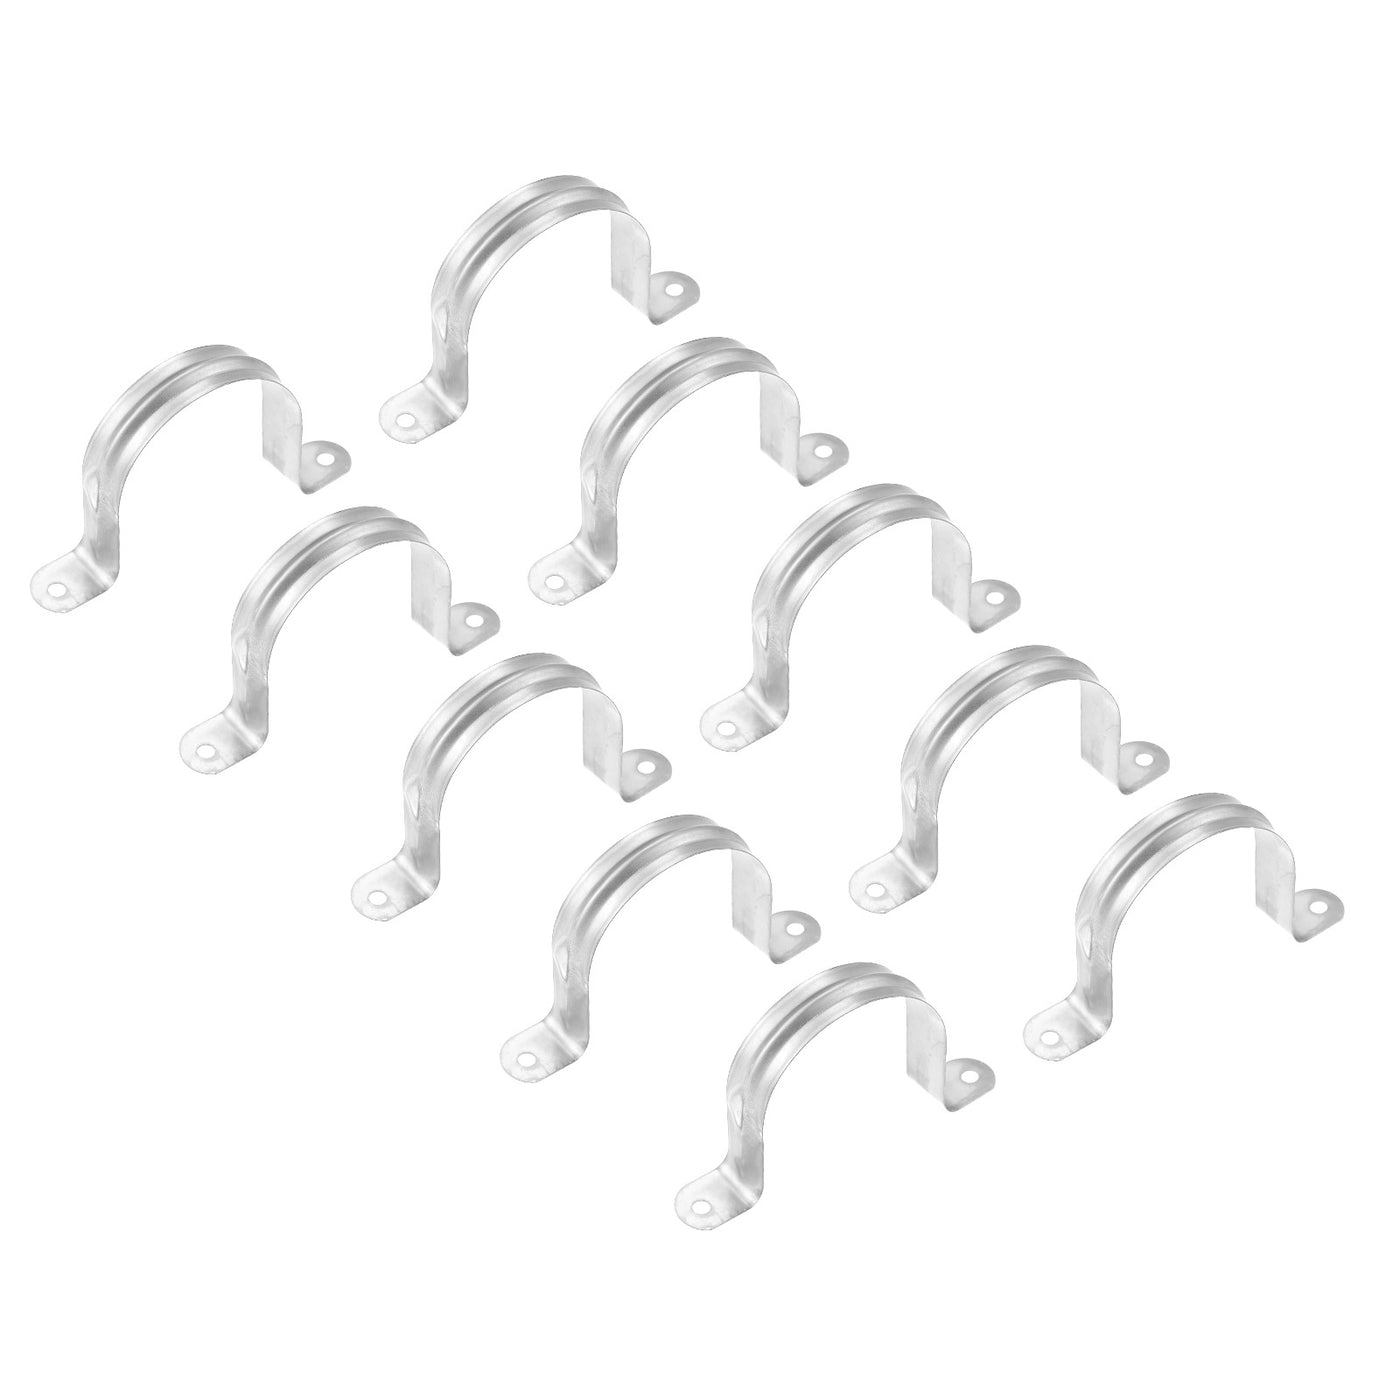 uxcell Uxcell Rigid Pipe Strap 24pcs 3" (75mm) Carbon Steel U Bracket Tension Tube Clamp